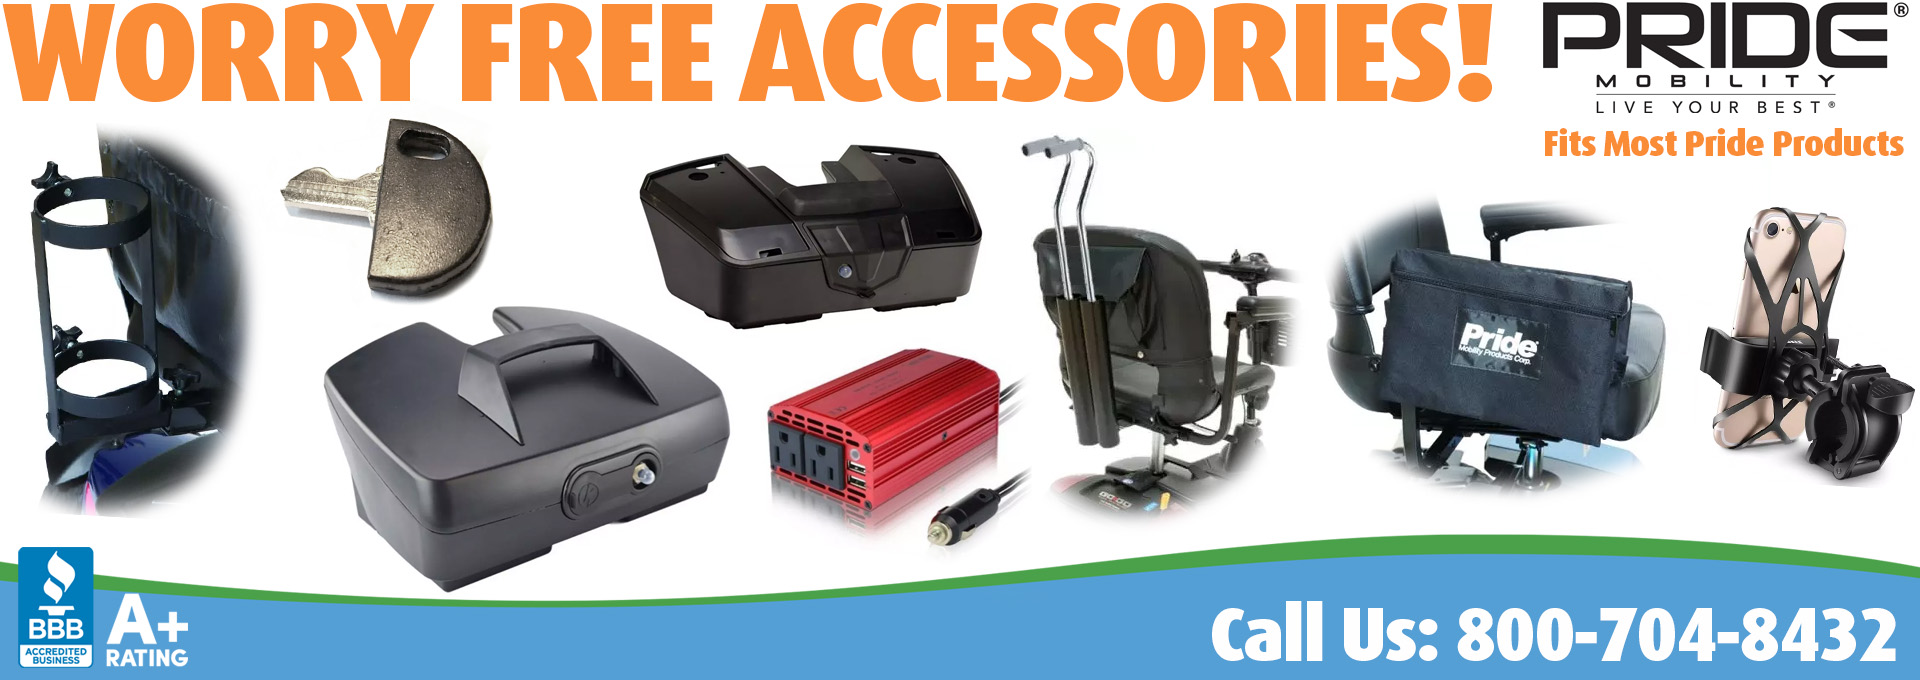 Living Well Stores: Parts and Accessories for Pride Mobility Products